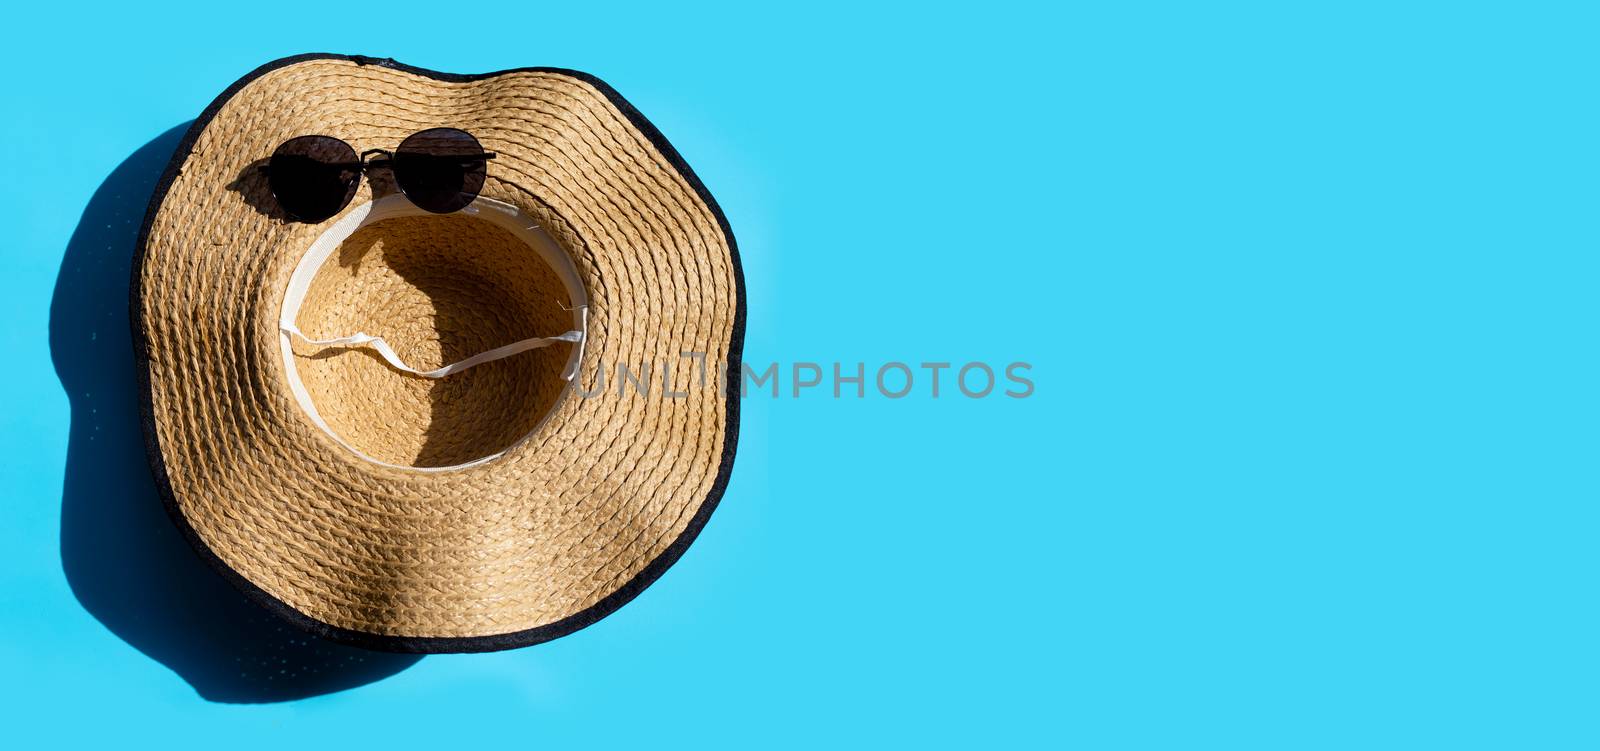 Hat and sunglasses on blue background. Enjoy summer holiday concept. Copy space